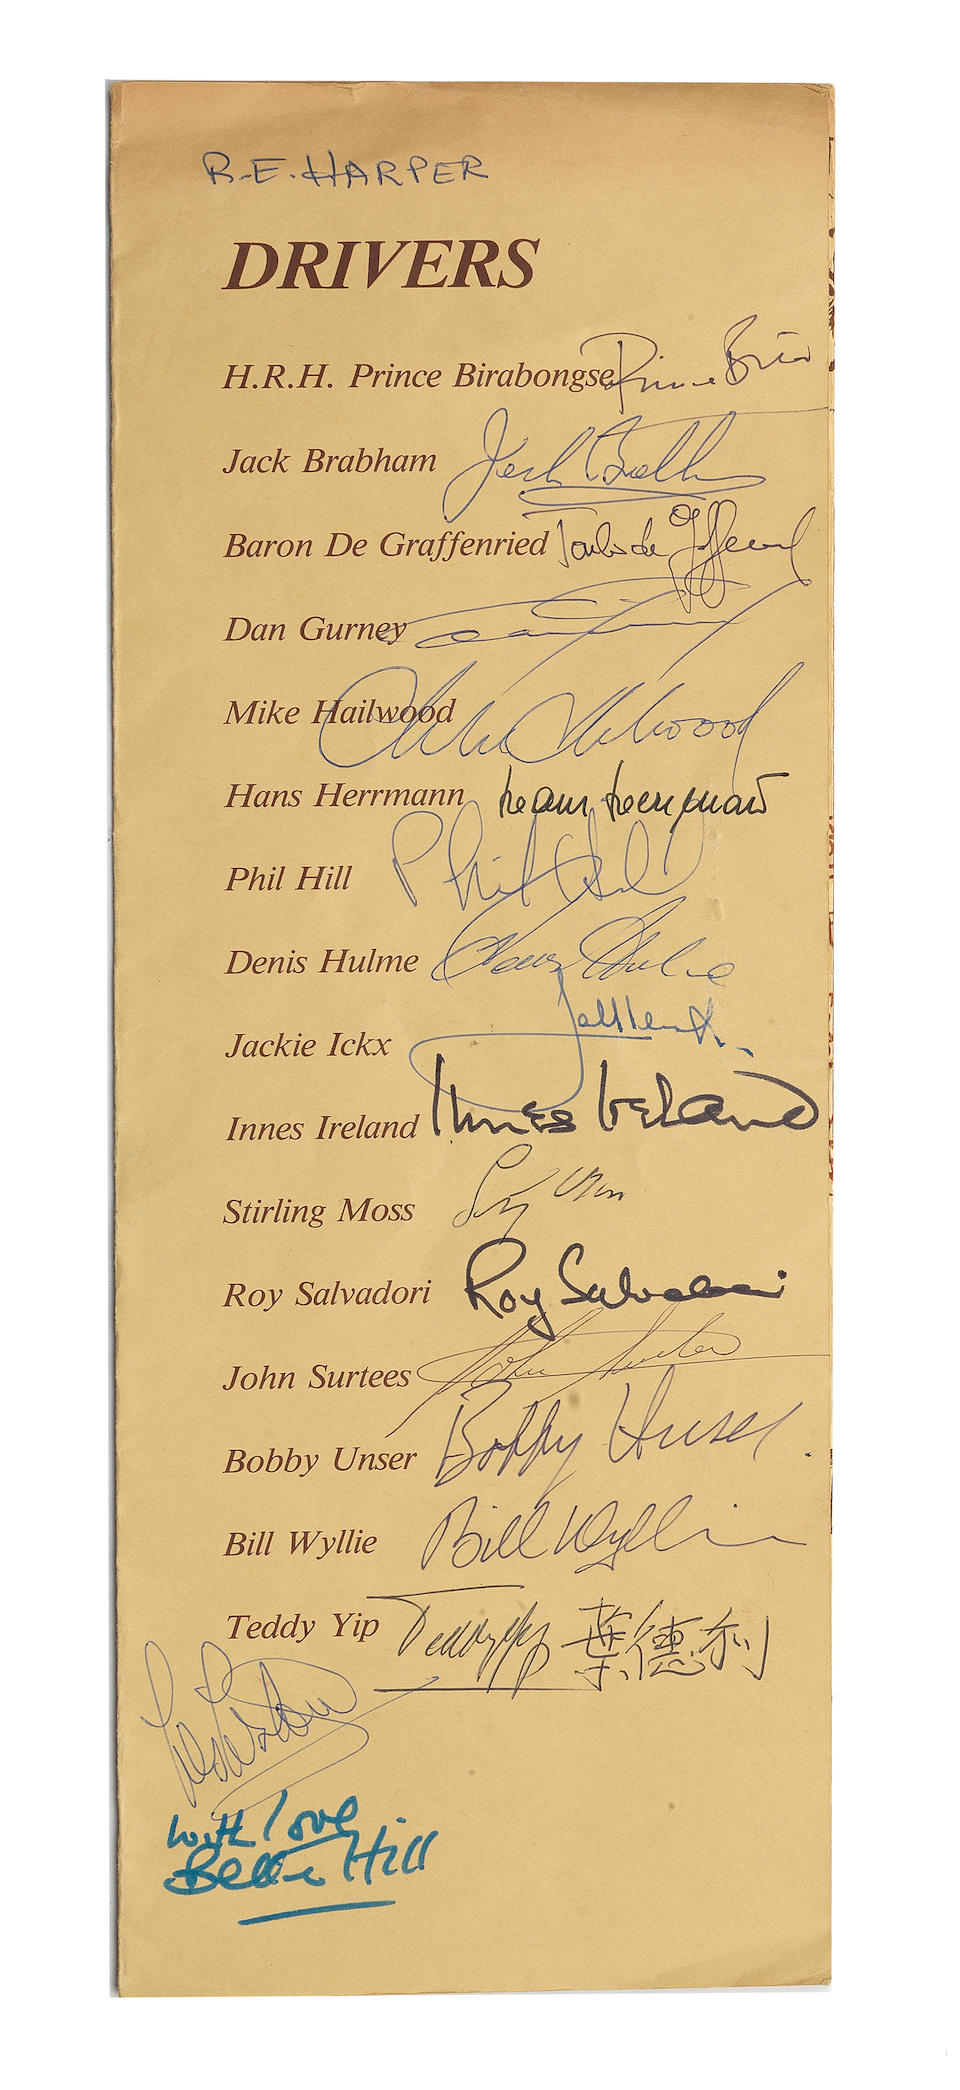 A 1978 Macau Grand Prix 'The Race of Giants' dinner menu signed by various drivers,